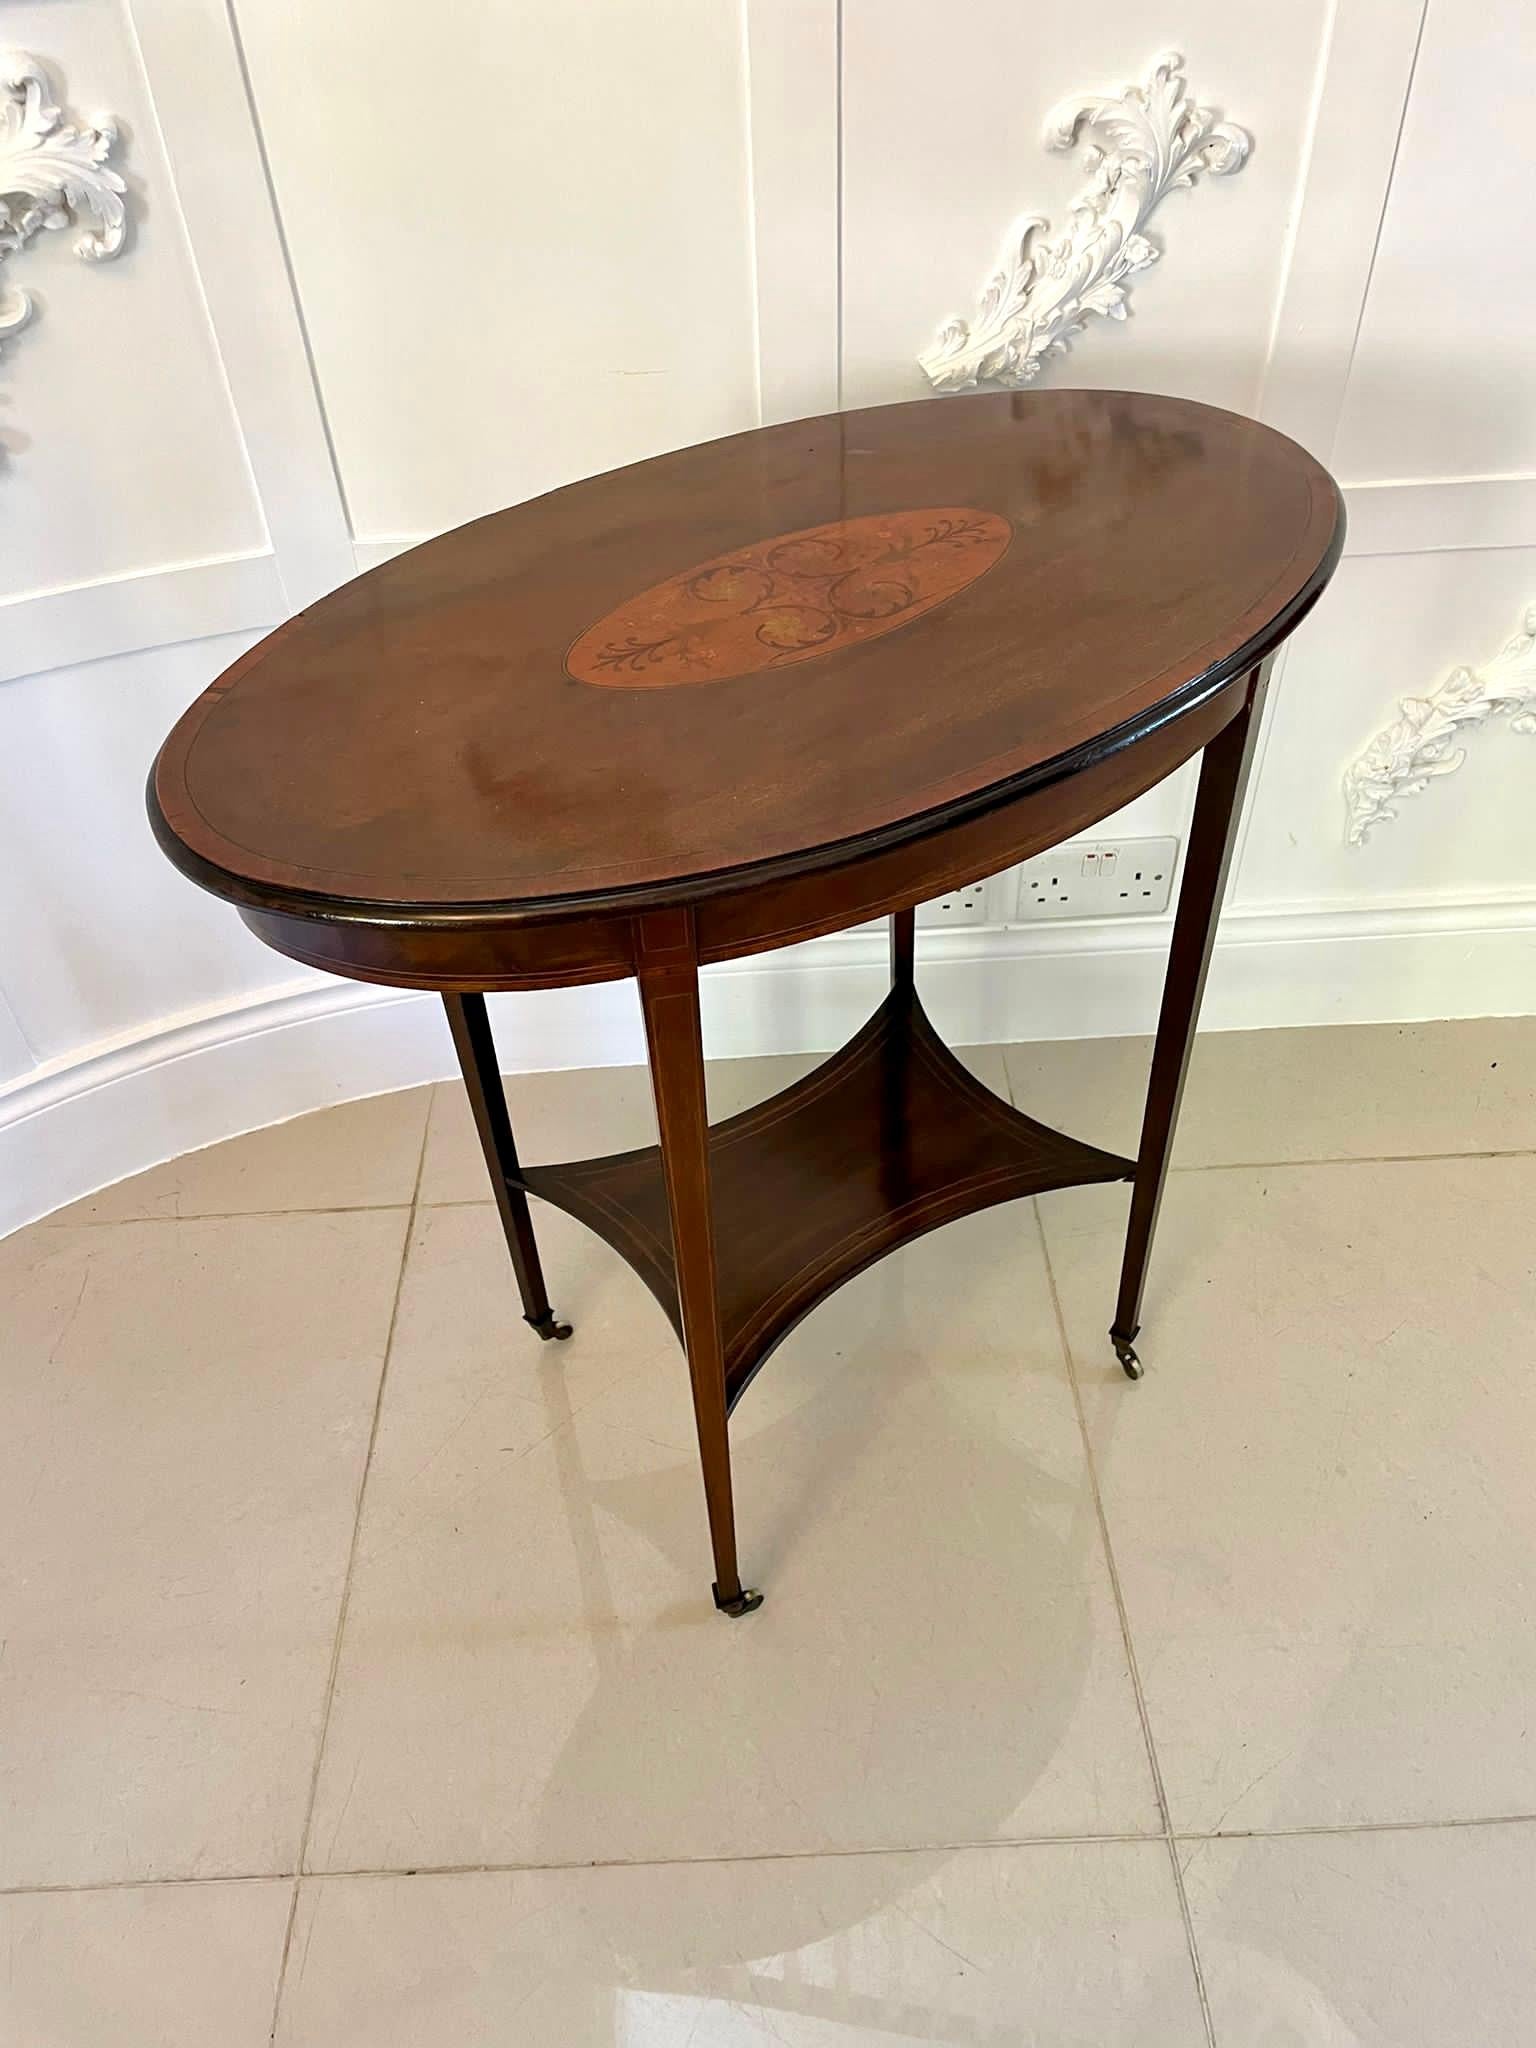 Other Antique Edwardian Oval Quality Mahogany Inlaid Lamp Table For Sale